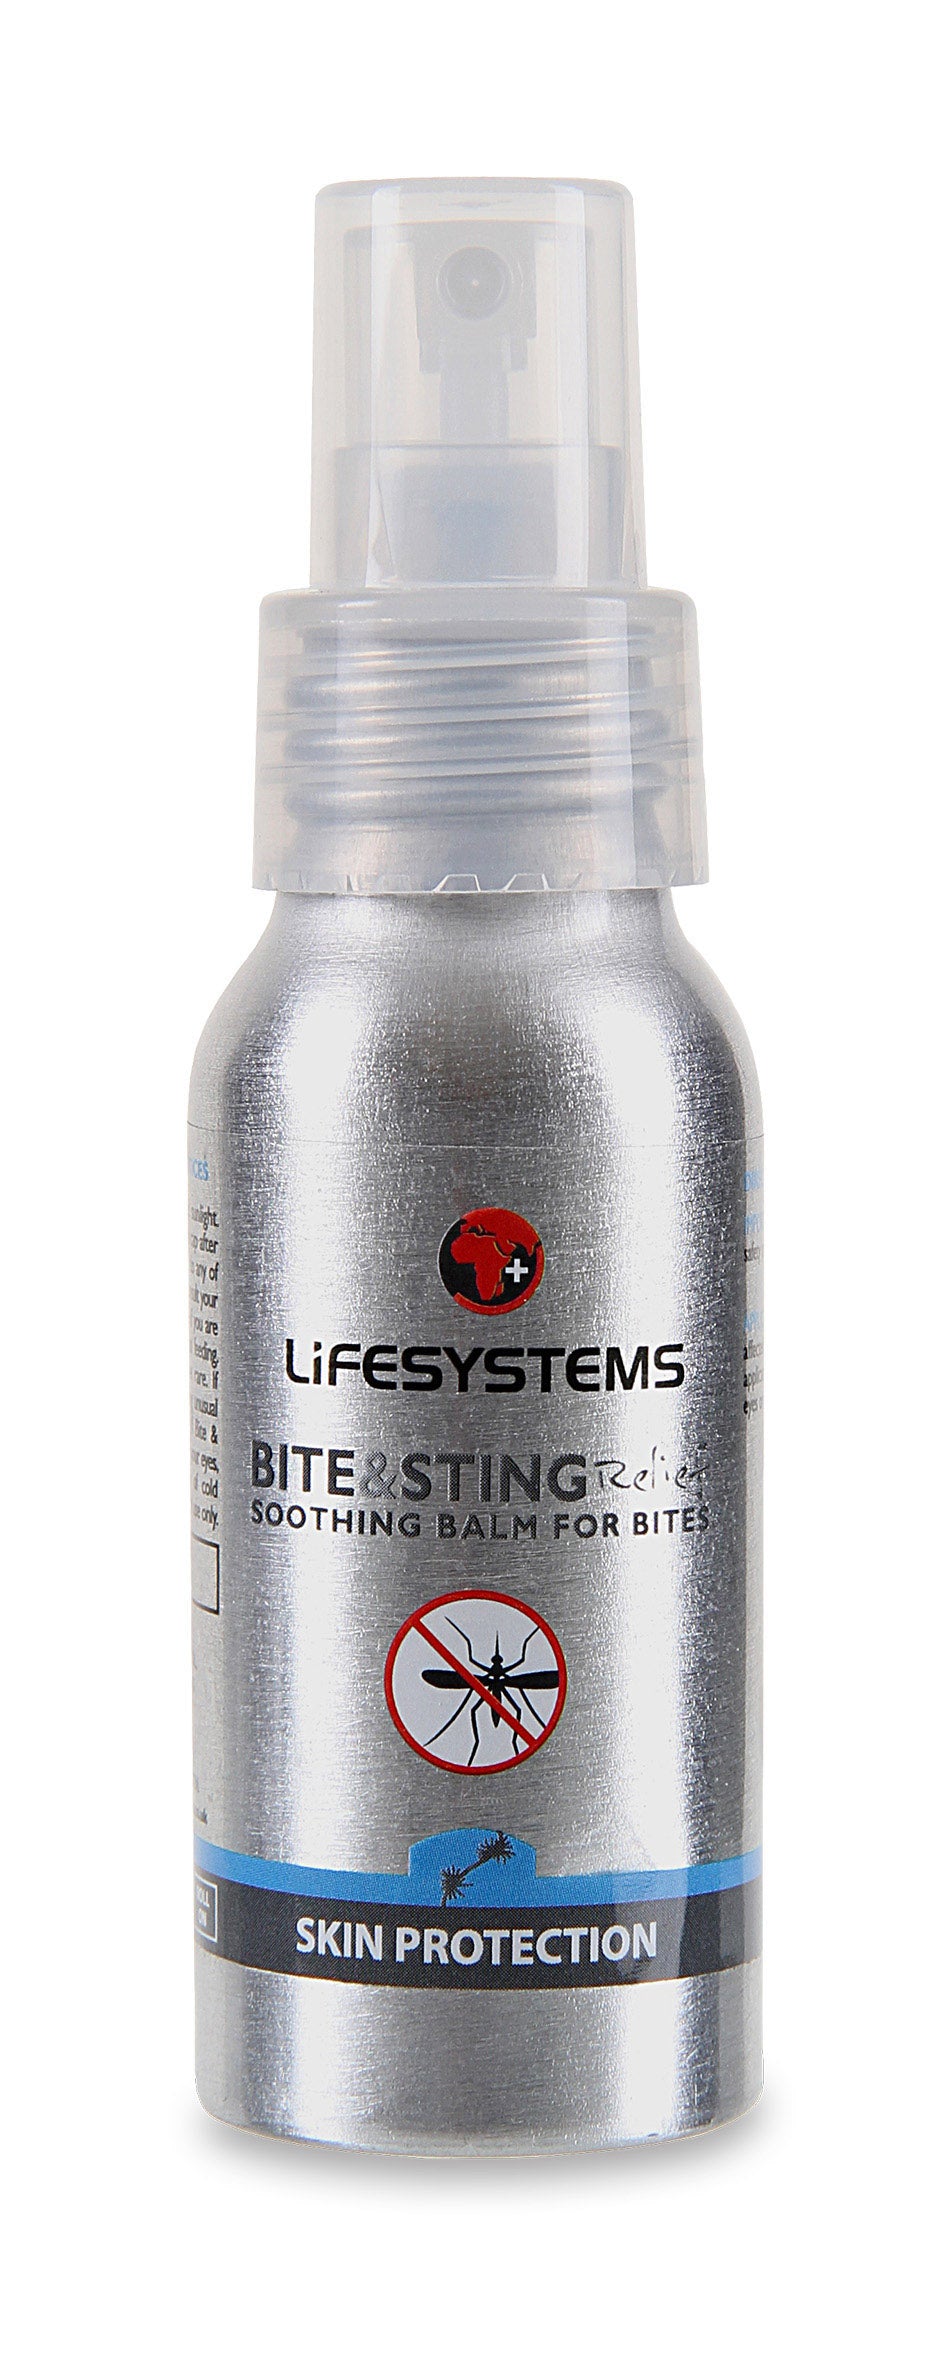 Lifesystems Bite and Sting Relief 50ml Spray | Insect Repellent | NZ